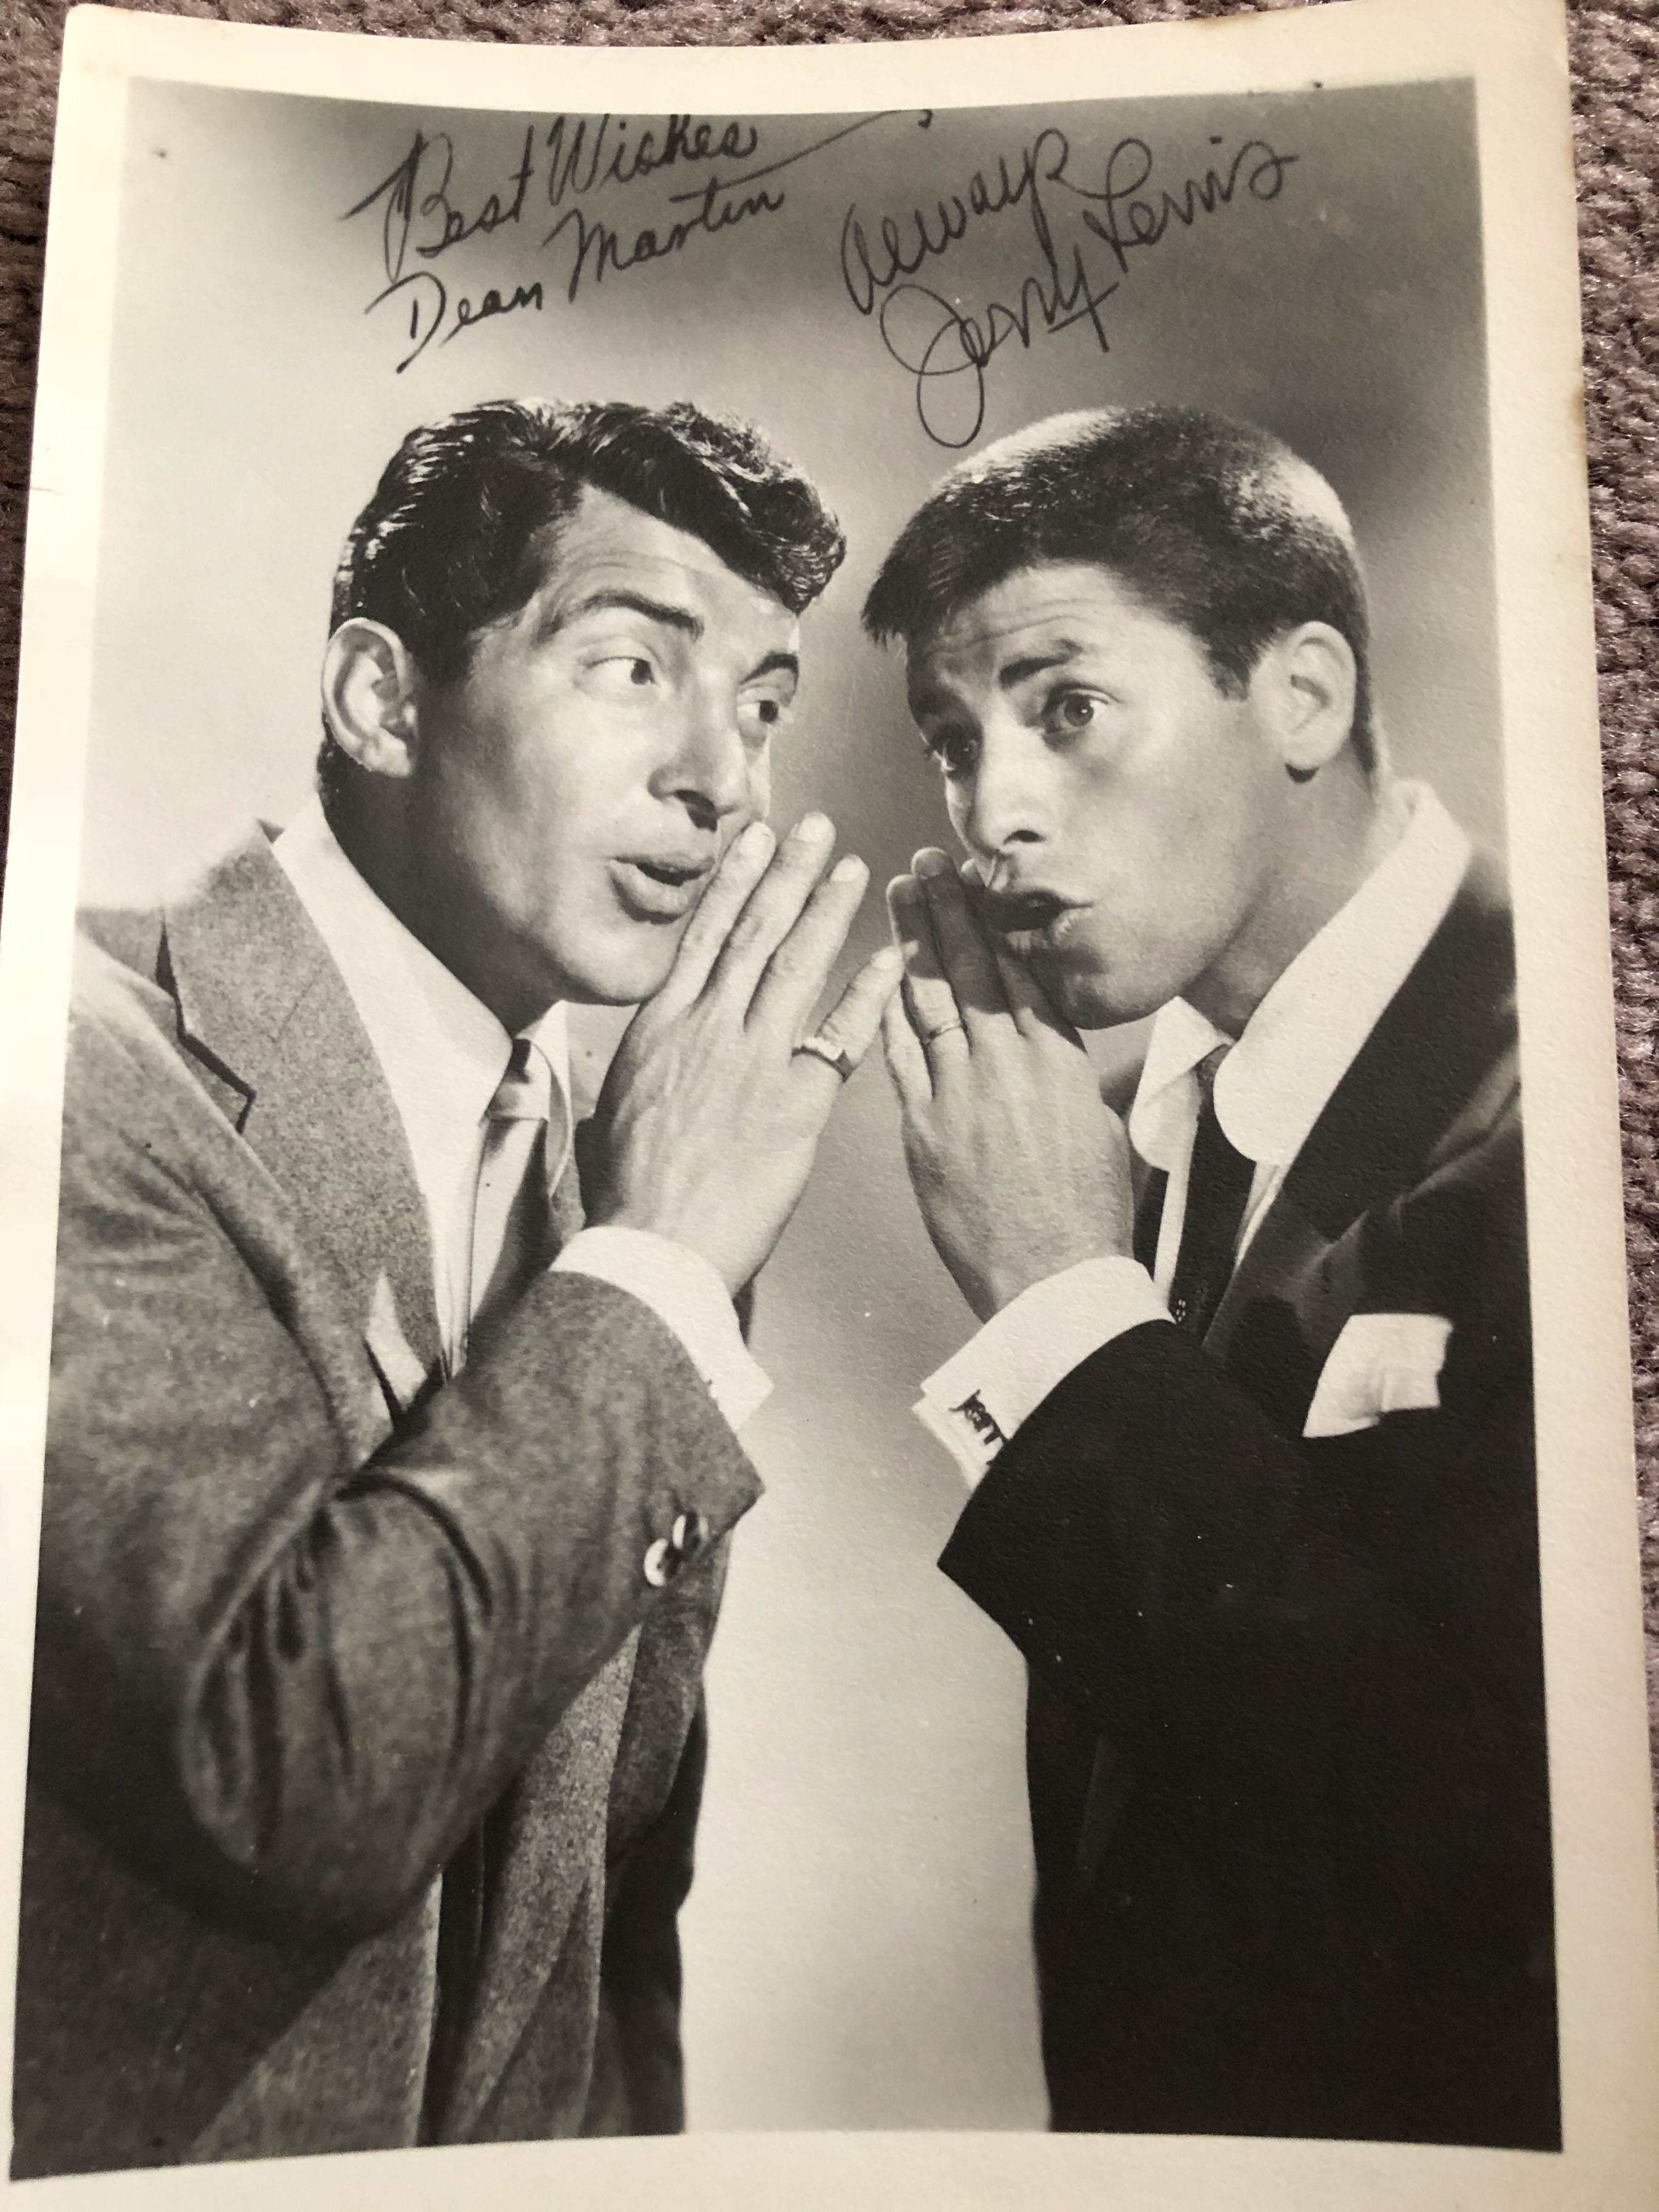 jim west collierville tn vintage photo of jerry lewis and dean martin